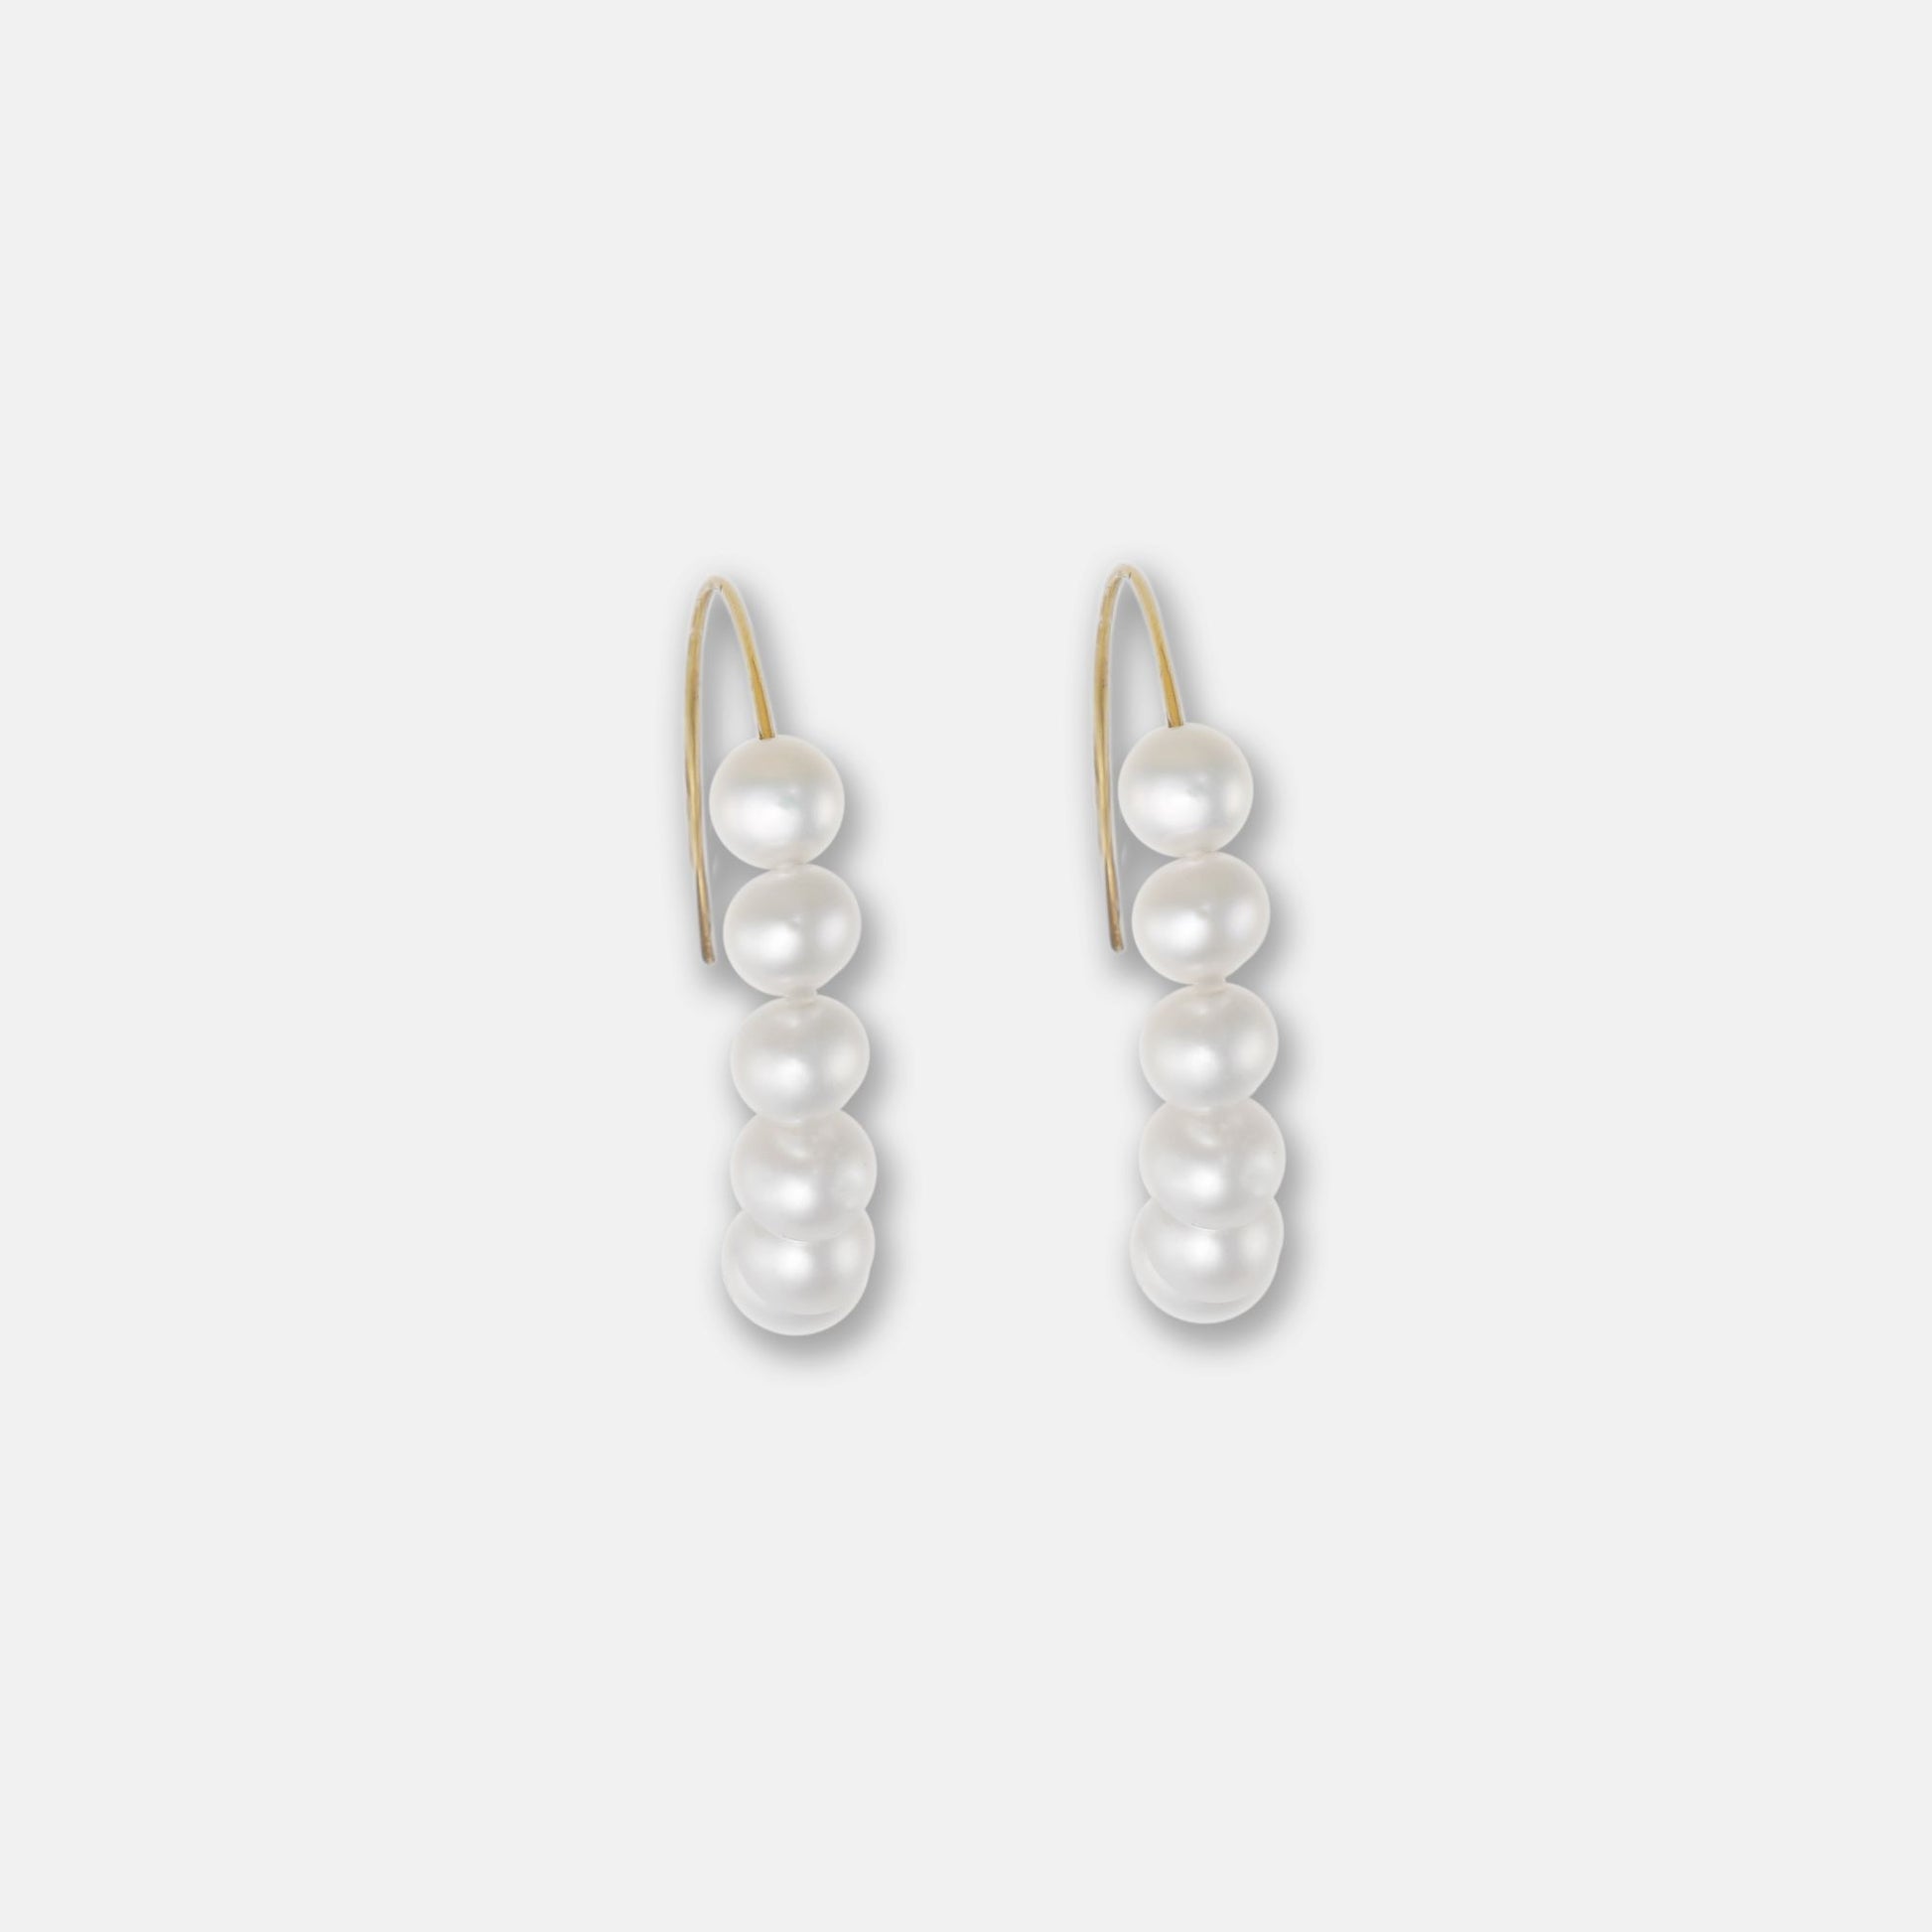 Gilded in gold, these pearl hoop earrings epitomize luxury. The delicate pearls add a touch of refinement, making them a must-have accessory.